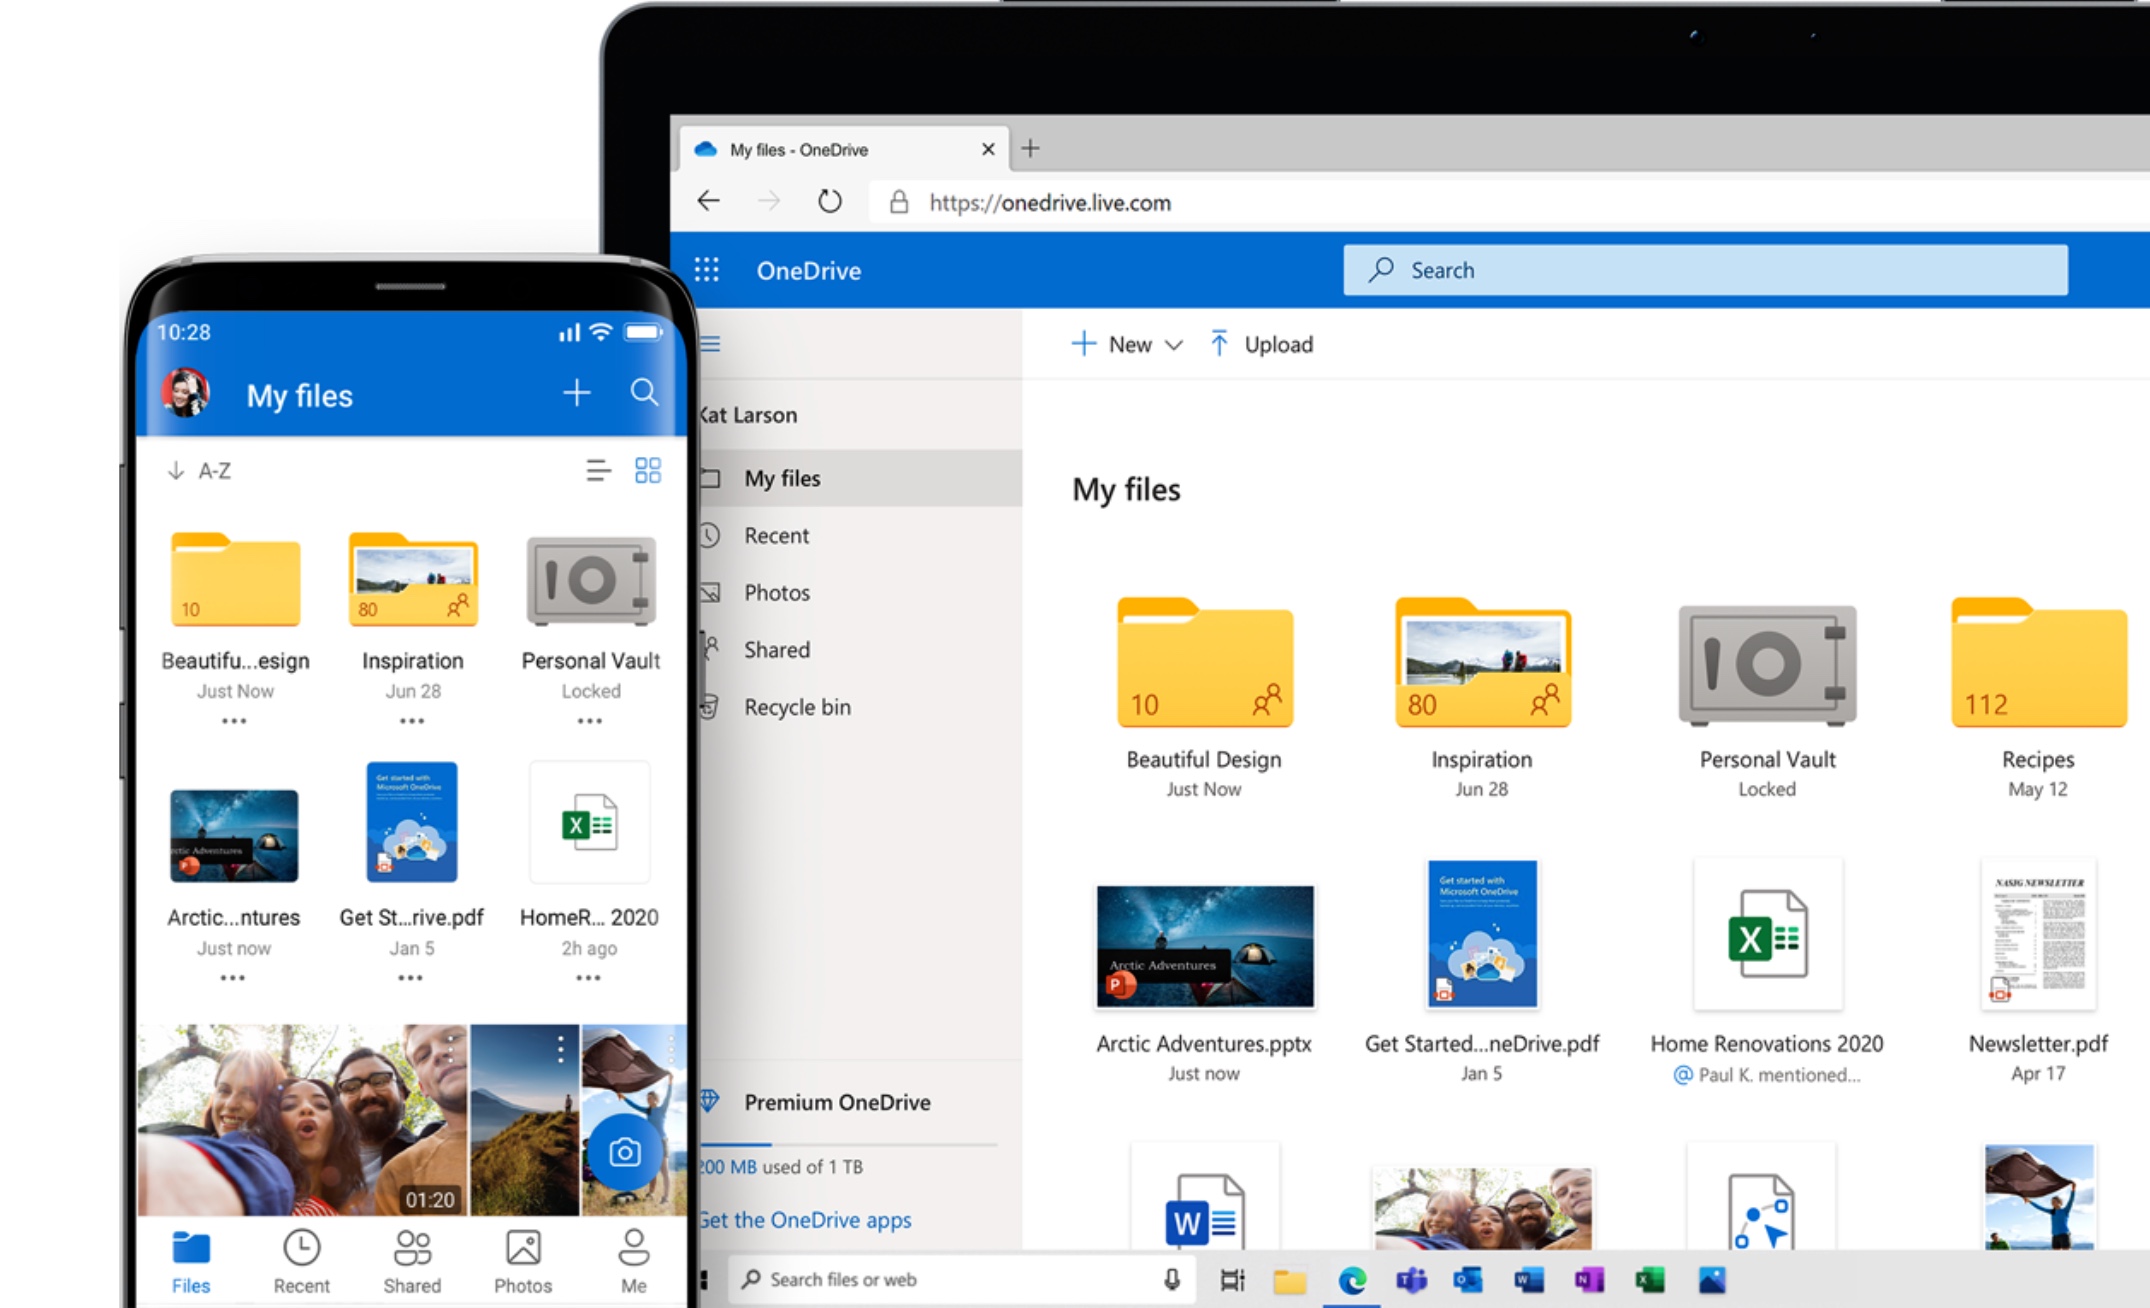 onedrive for business windows 7 download